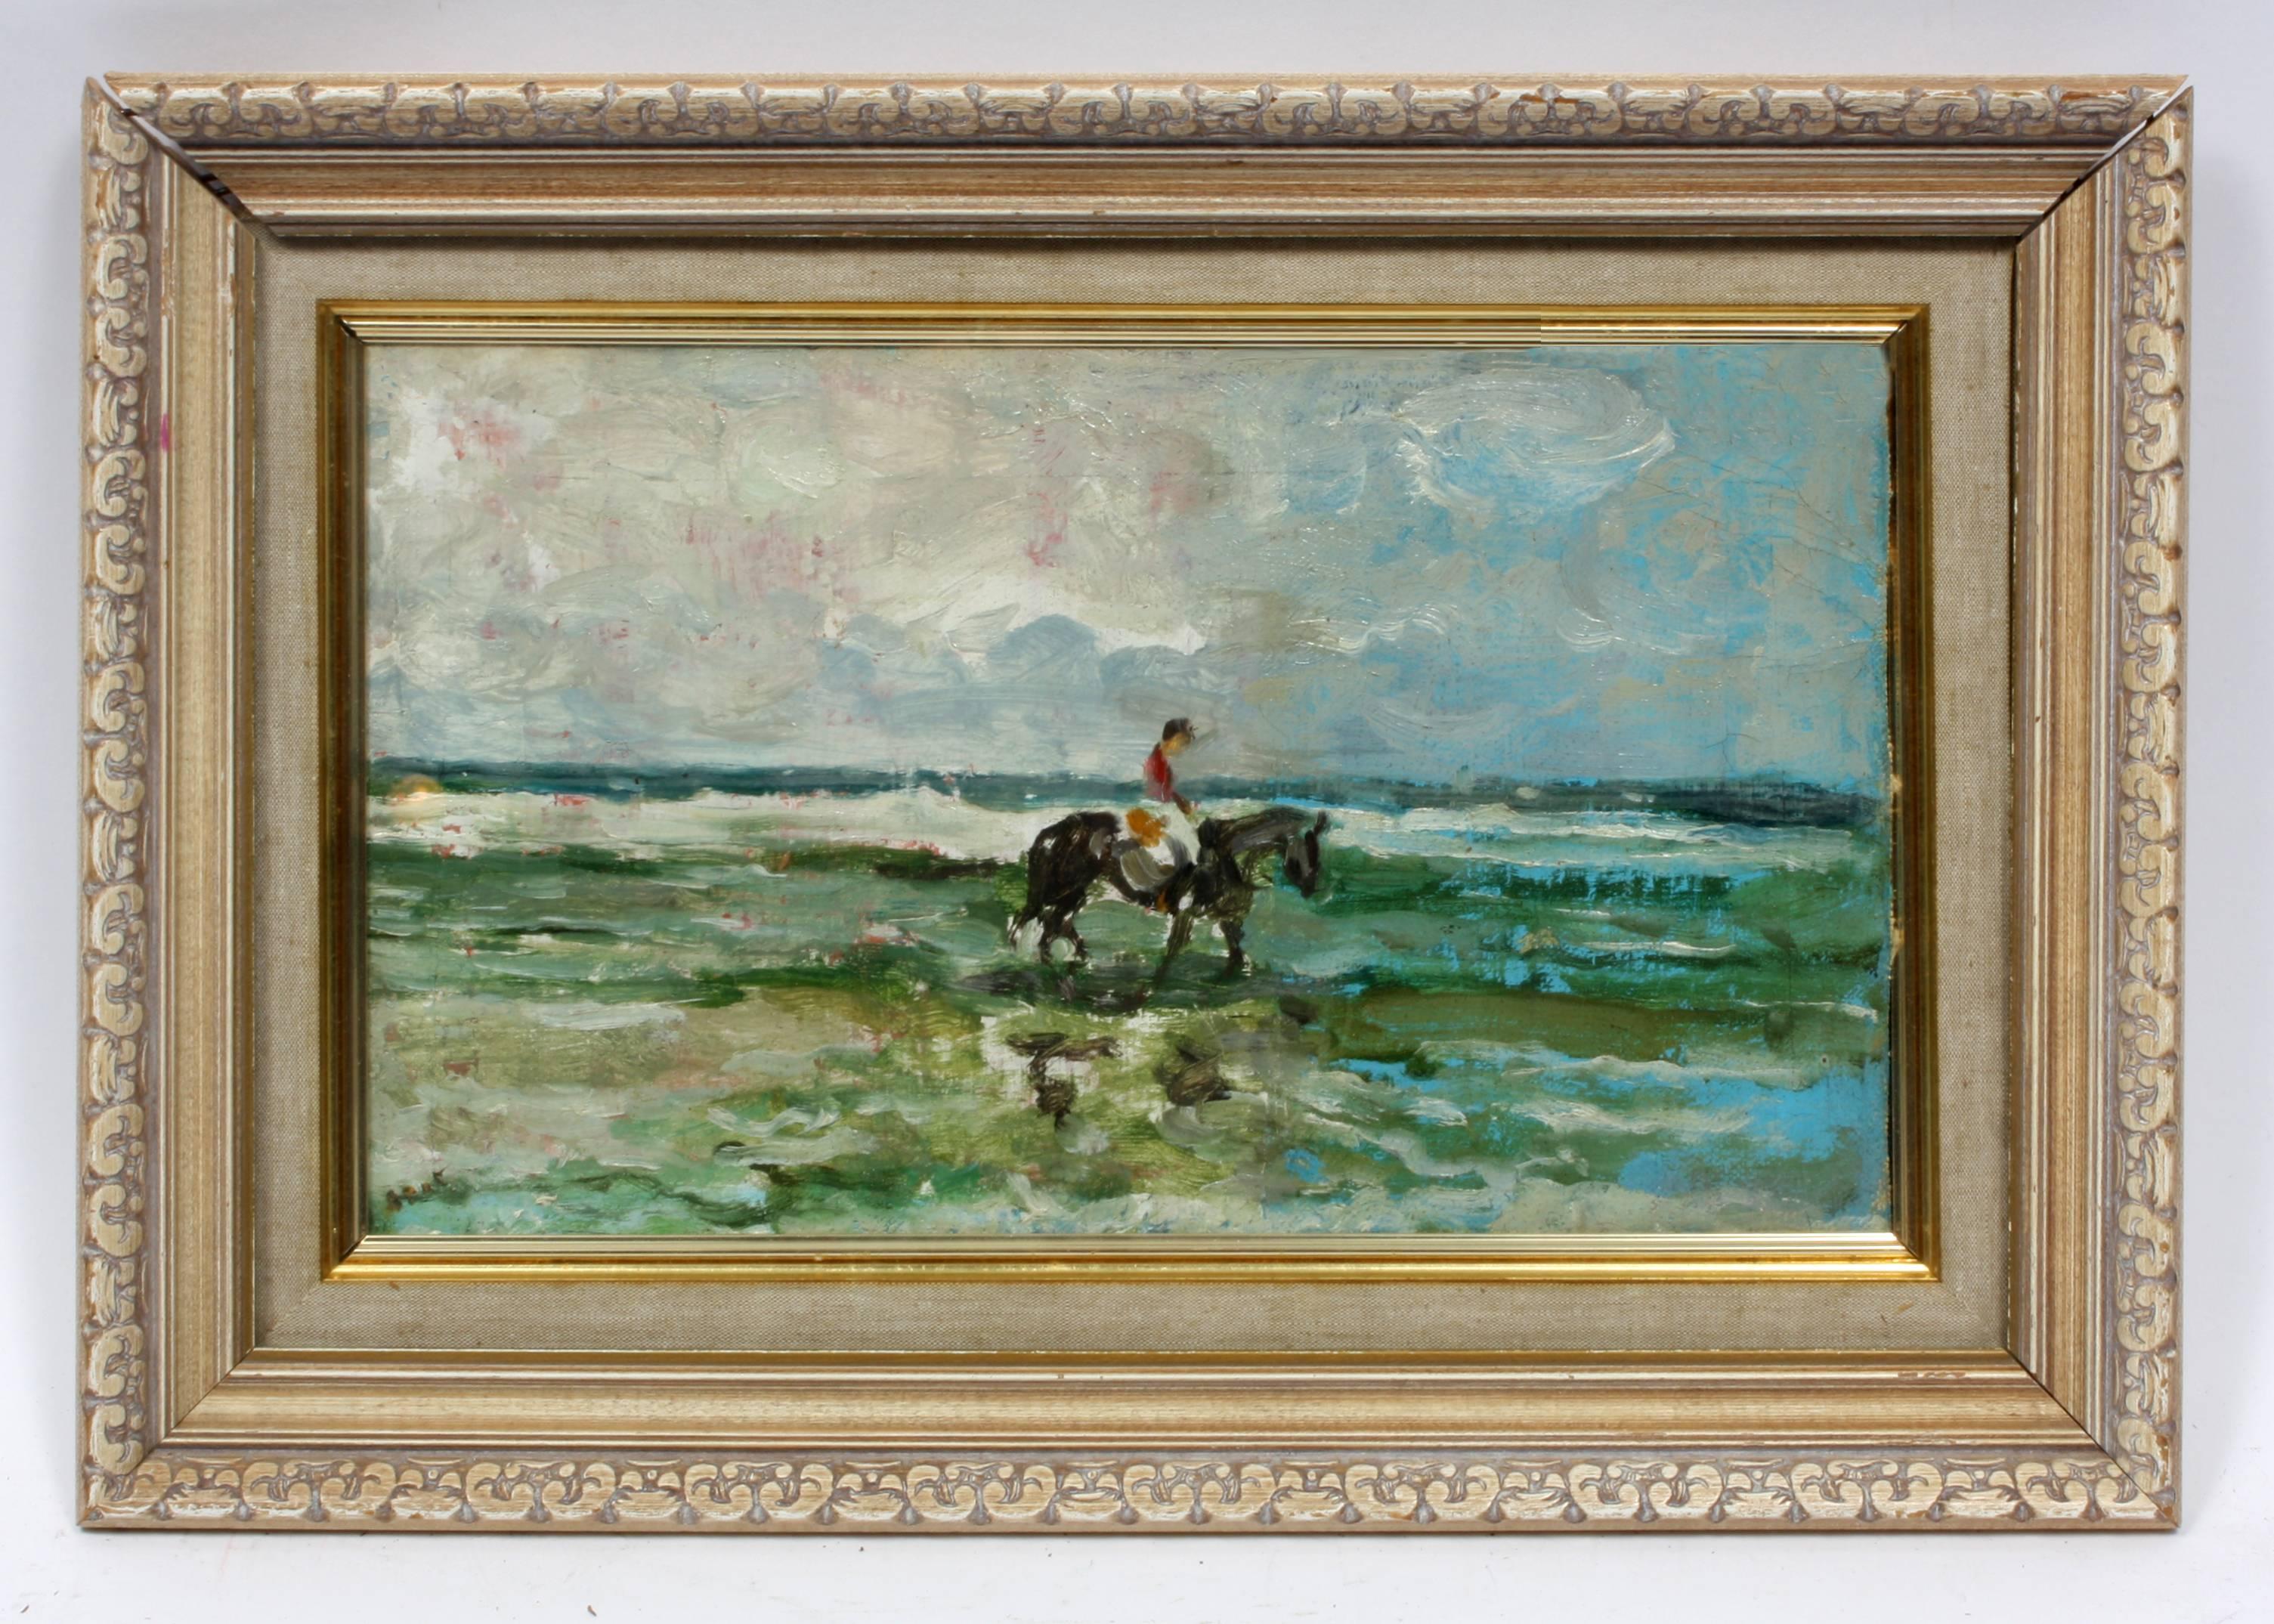 Gabriel Spat Landscape Painting - Lone Ride on the Beach